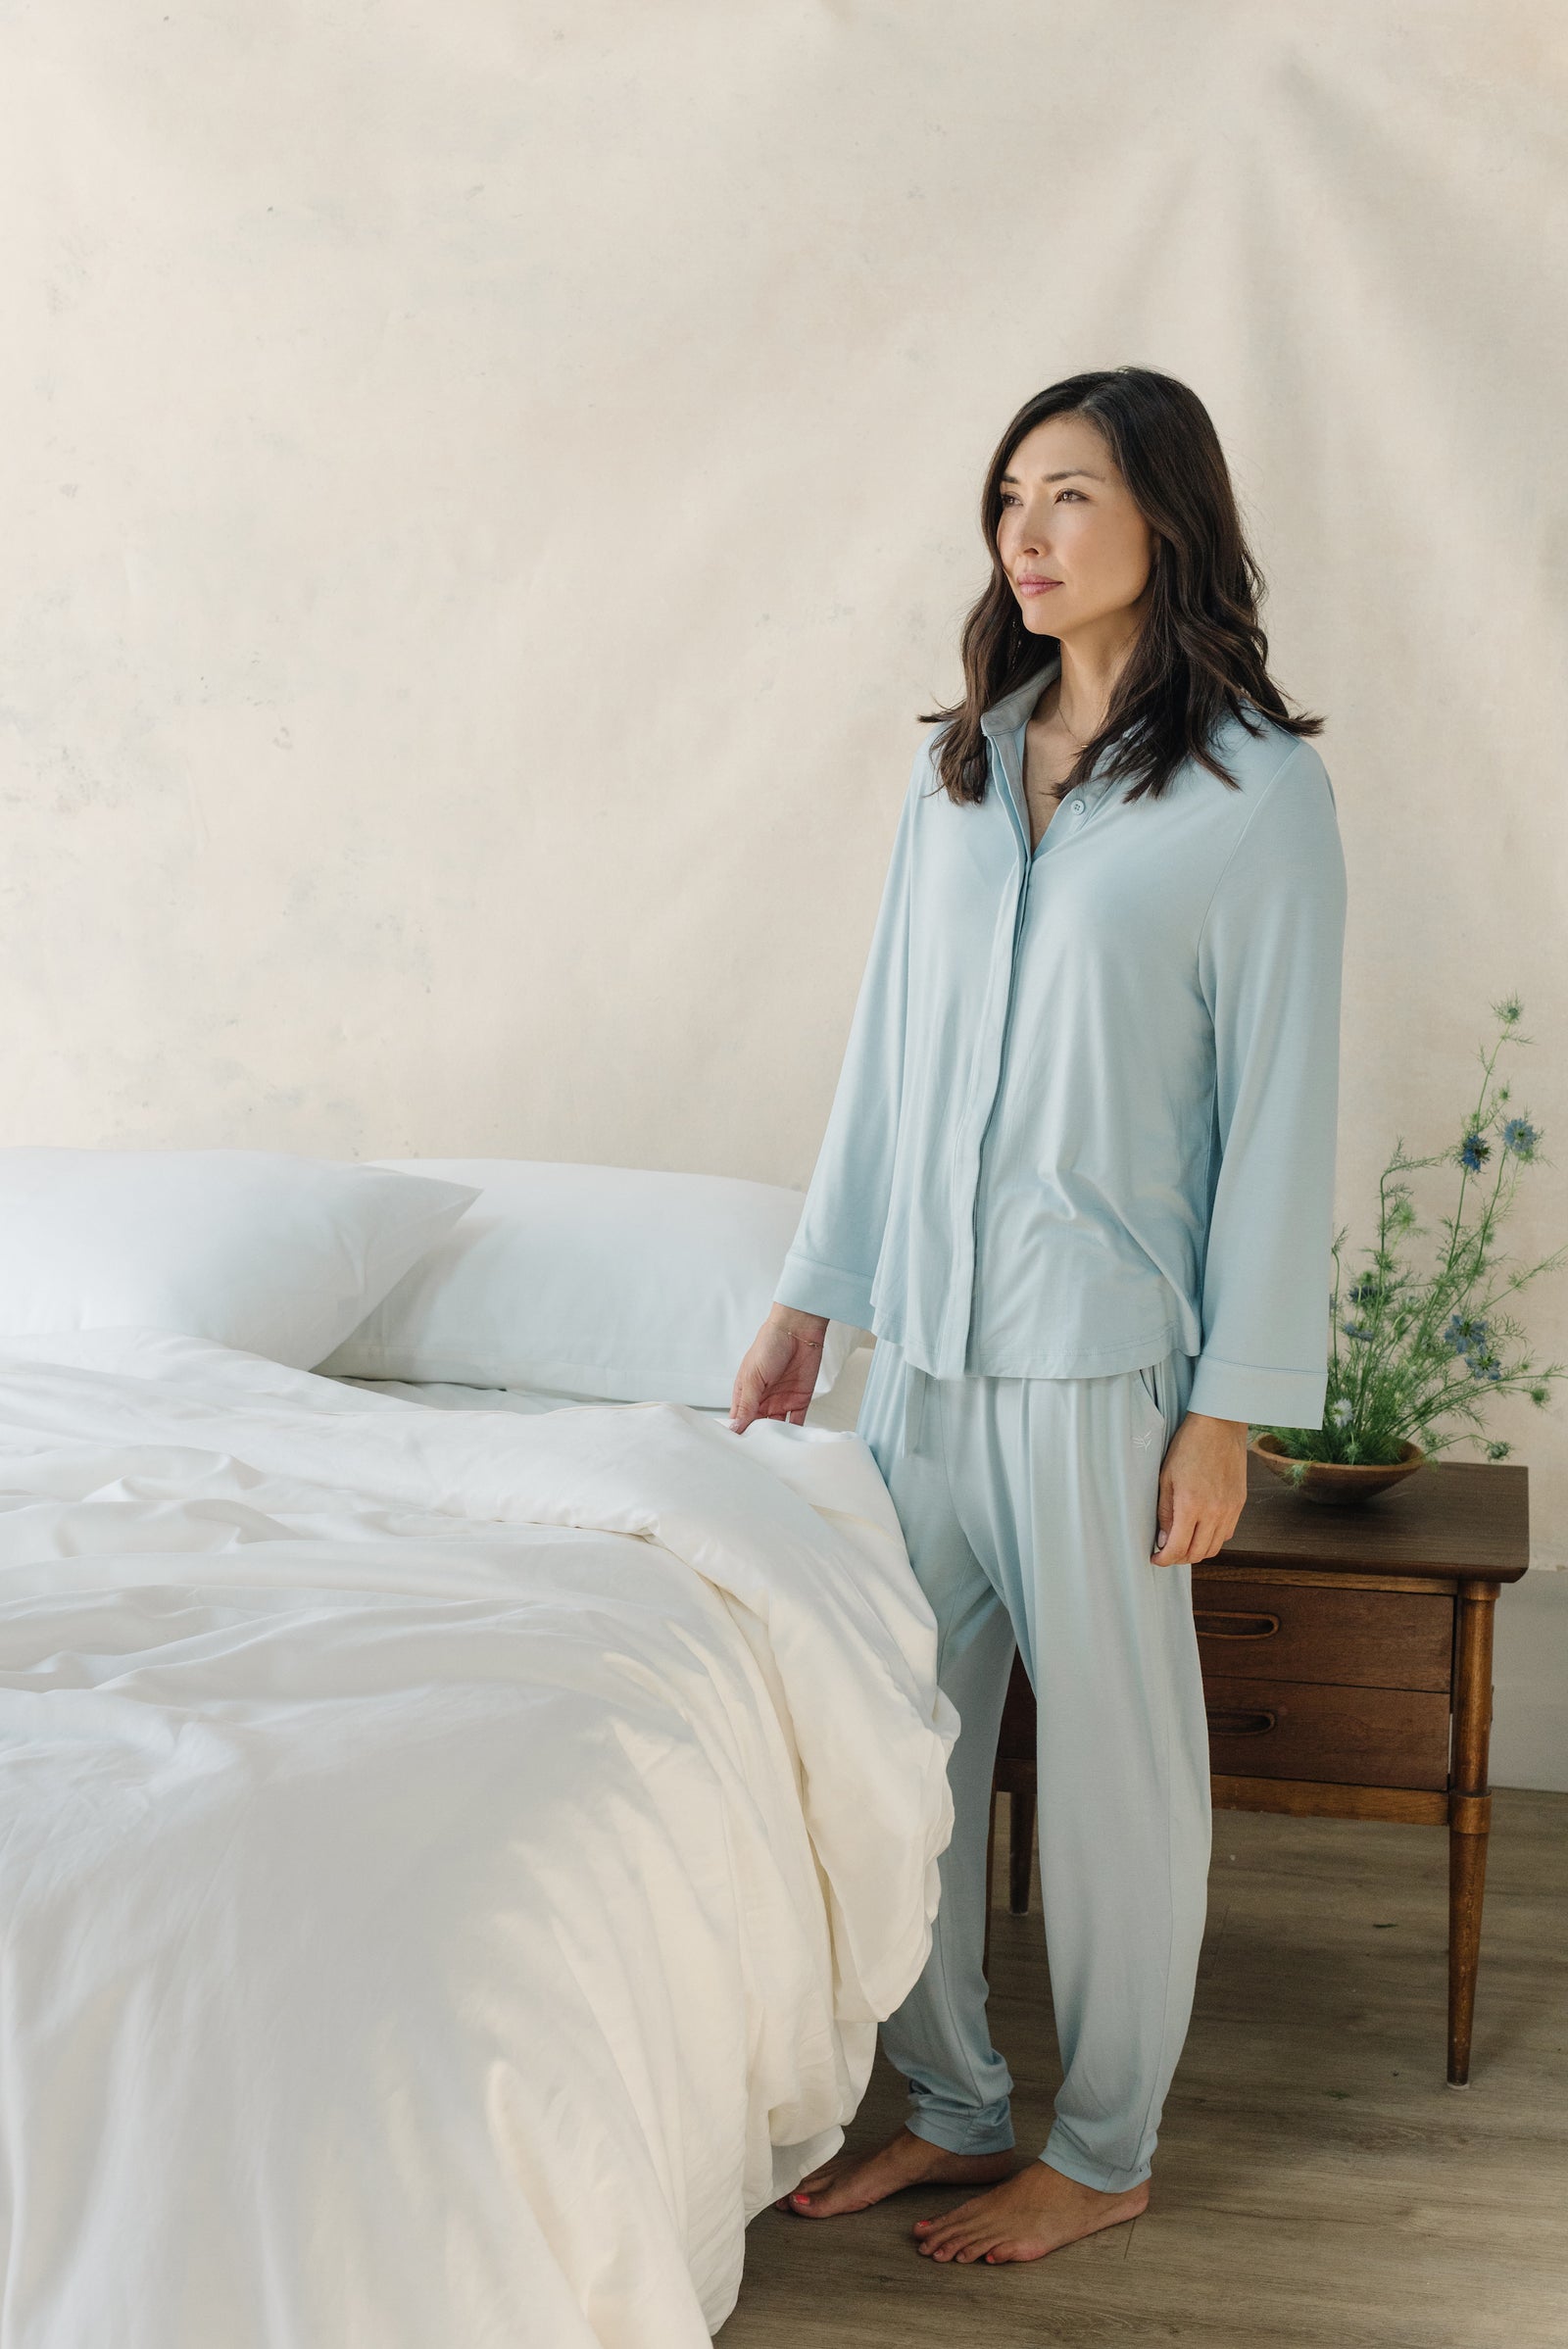 White Bamboo Linen Pillow Cases on a navy bed. A woman in pajamas is standing next to the bed.